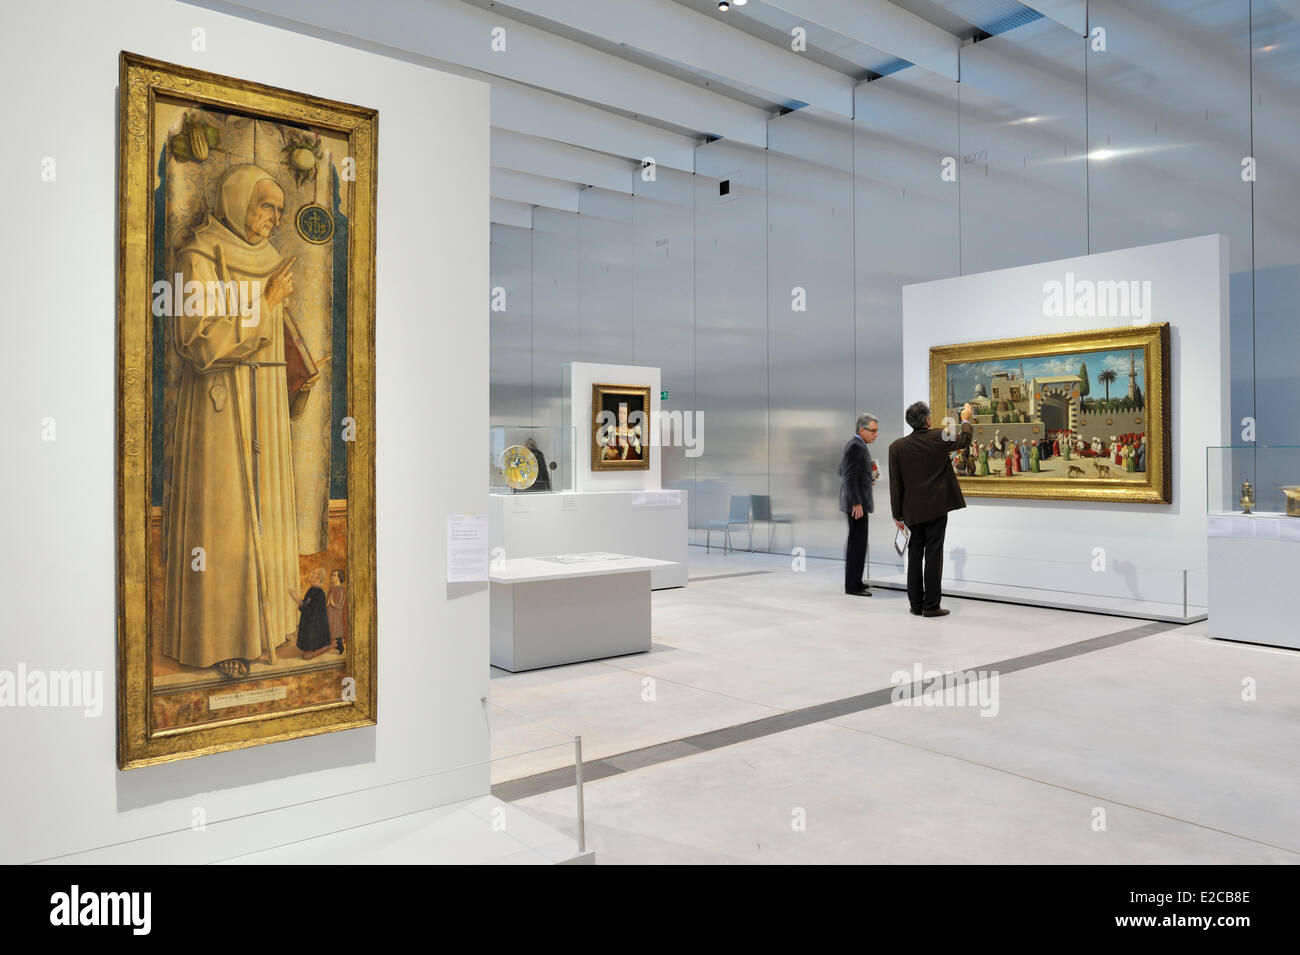 France, Pas de Calais, Lens, Lens Louvre Museum designed by SANAA Japanese Architecure Firm and architects Celia Imrey and Tim Culbert, Galerie du Temps (Gallery of the Time), Gothic Europe, Saint Jacques de la Marche and two kneeling donors, painting by Carlo Crivelli of 1477 Stock Photo